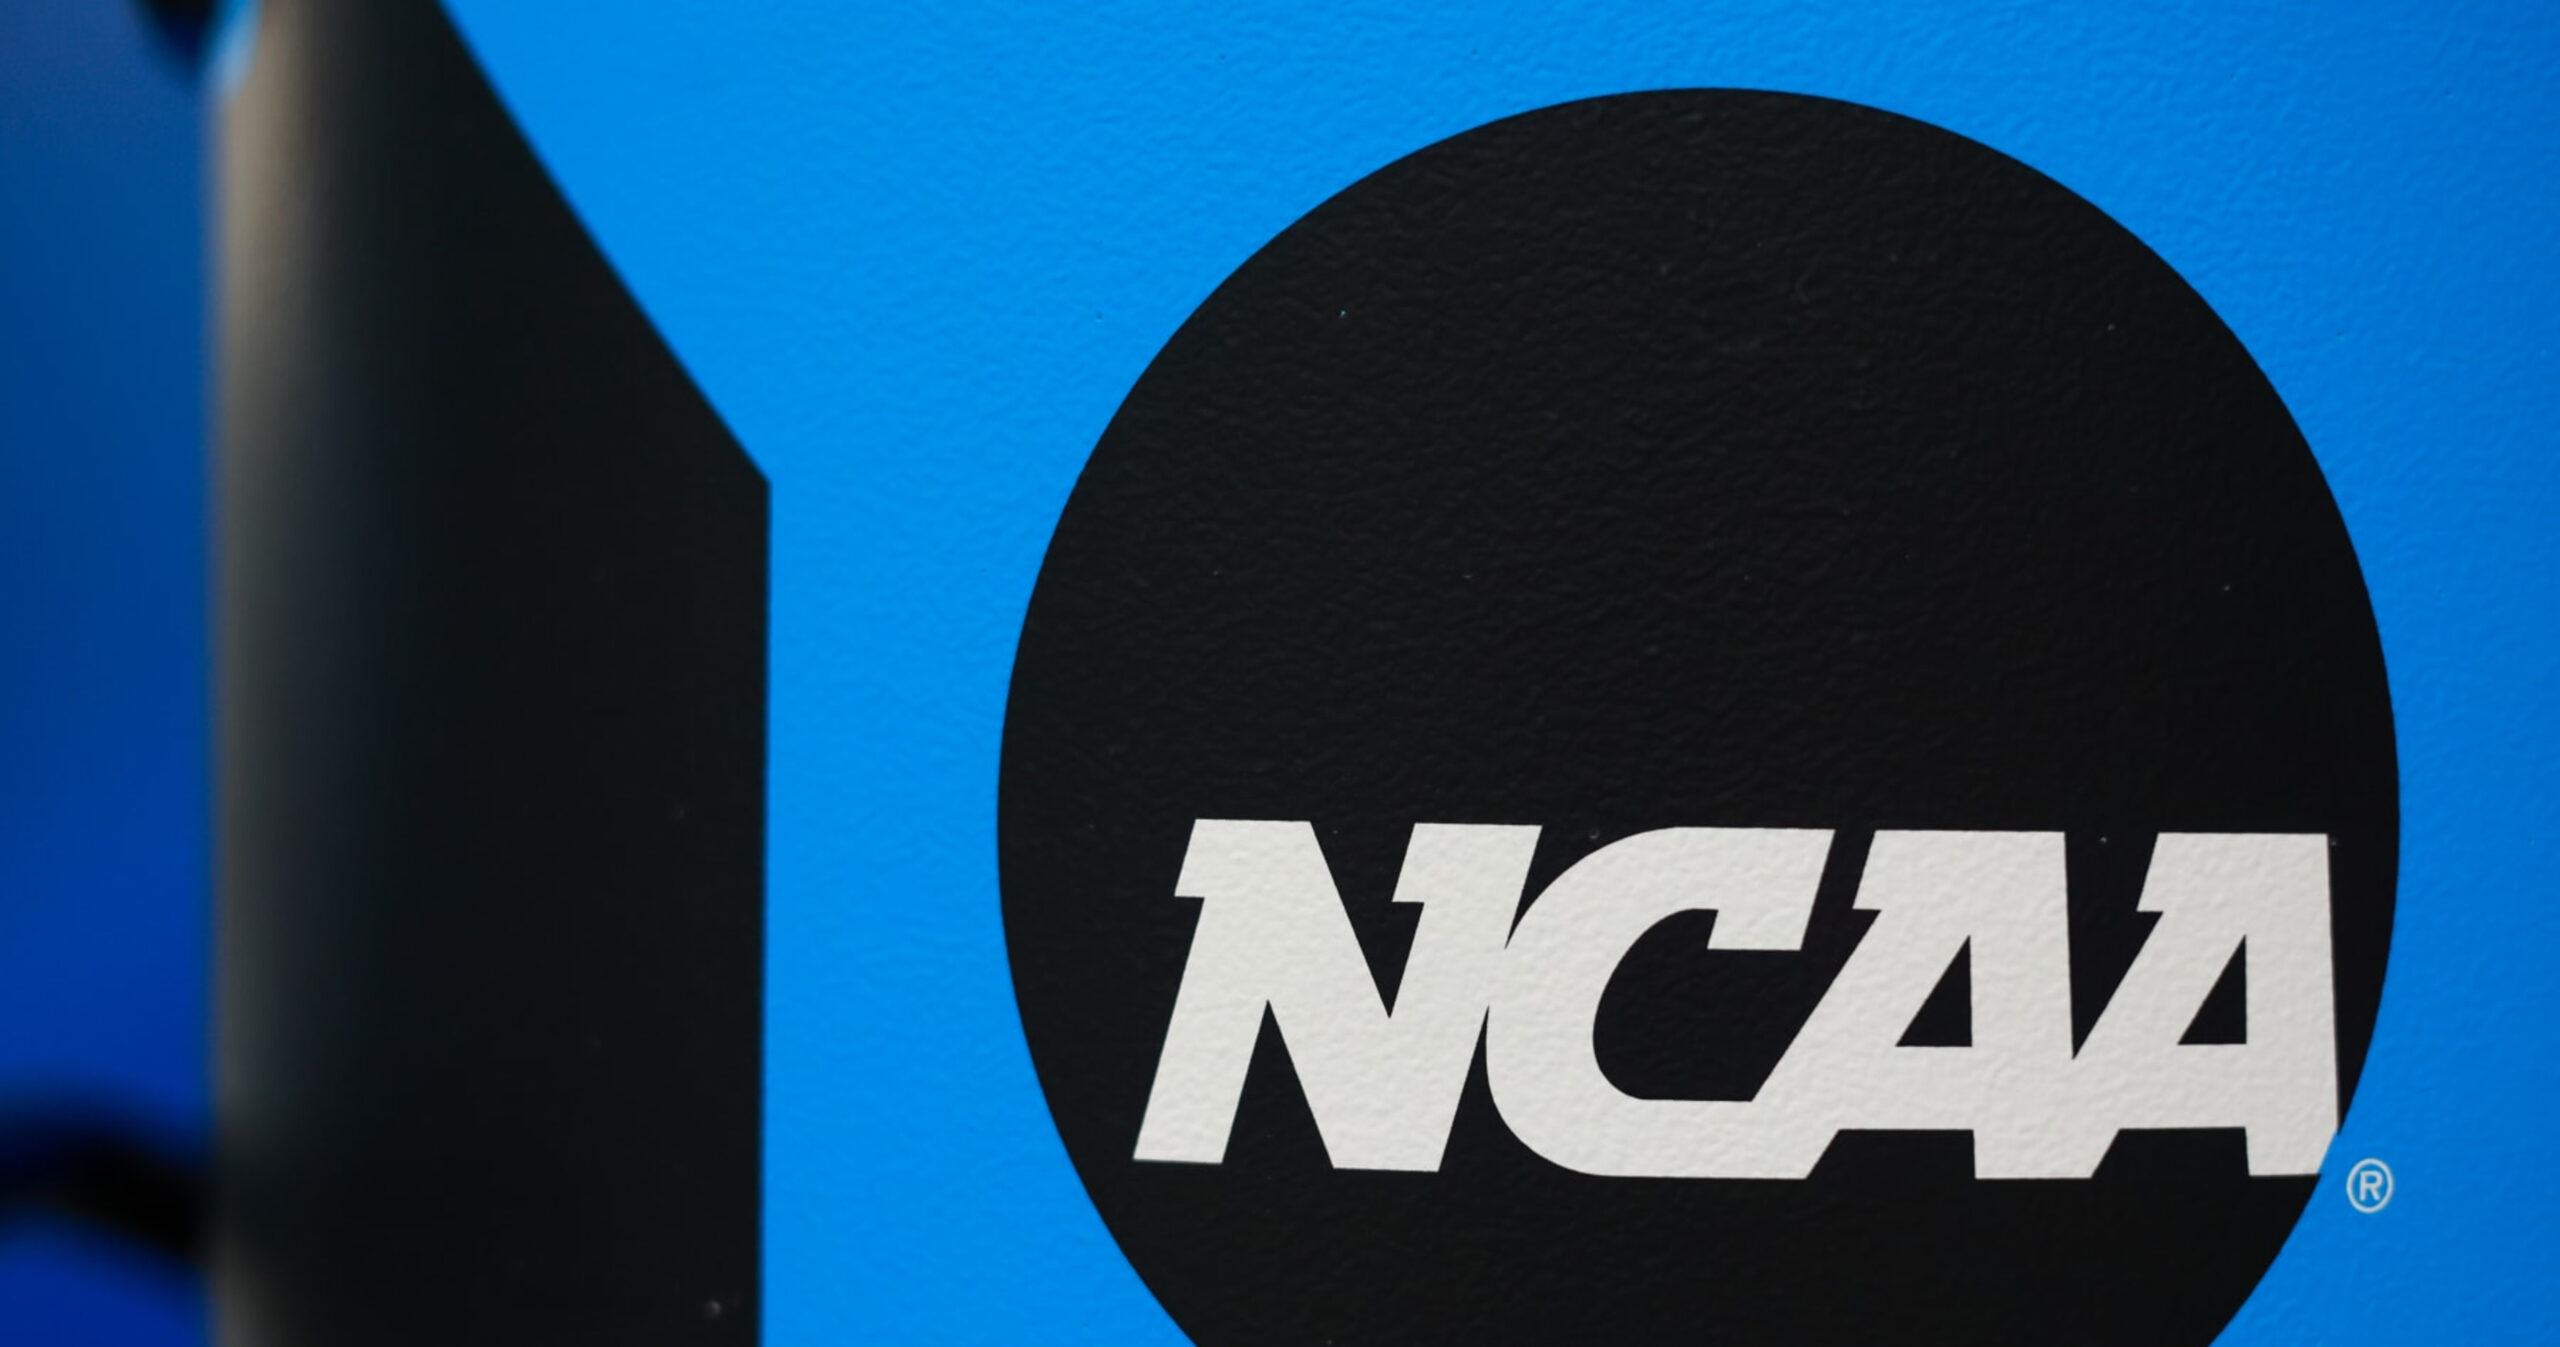 NCAA to Push for End of Prop Bets on College Athletes, Cites Threats, Harassment